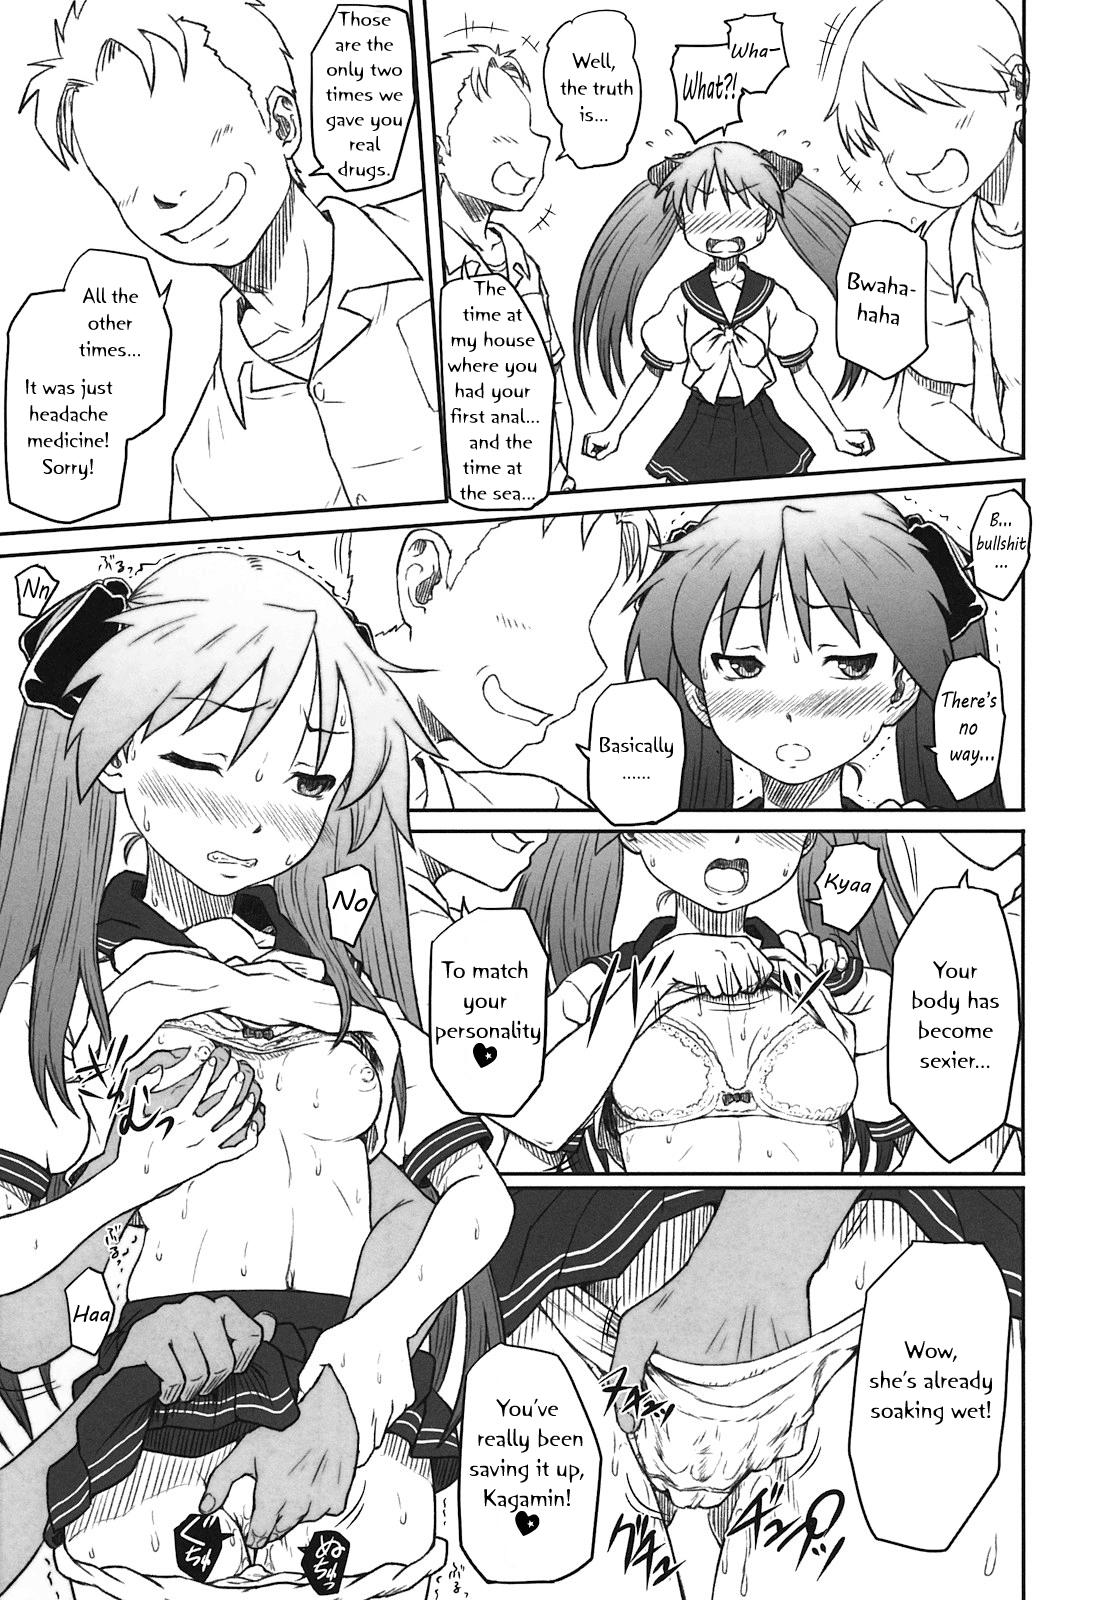 Best Blowjobs Kagamin wa Ore no Yome Kan - K on Lucky star Safado - Page 8